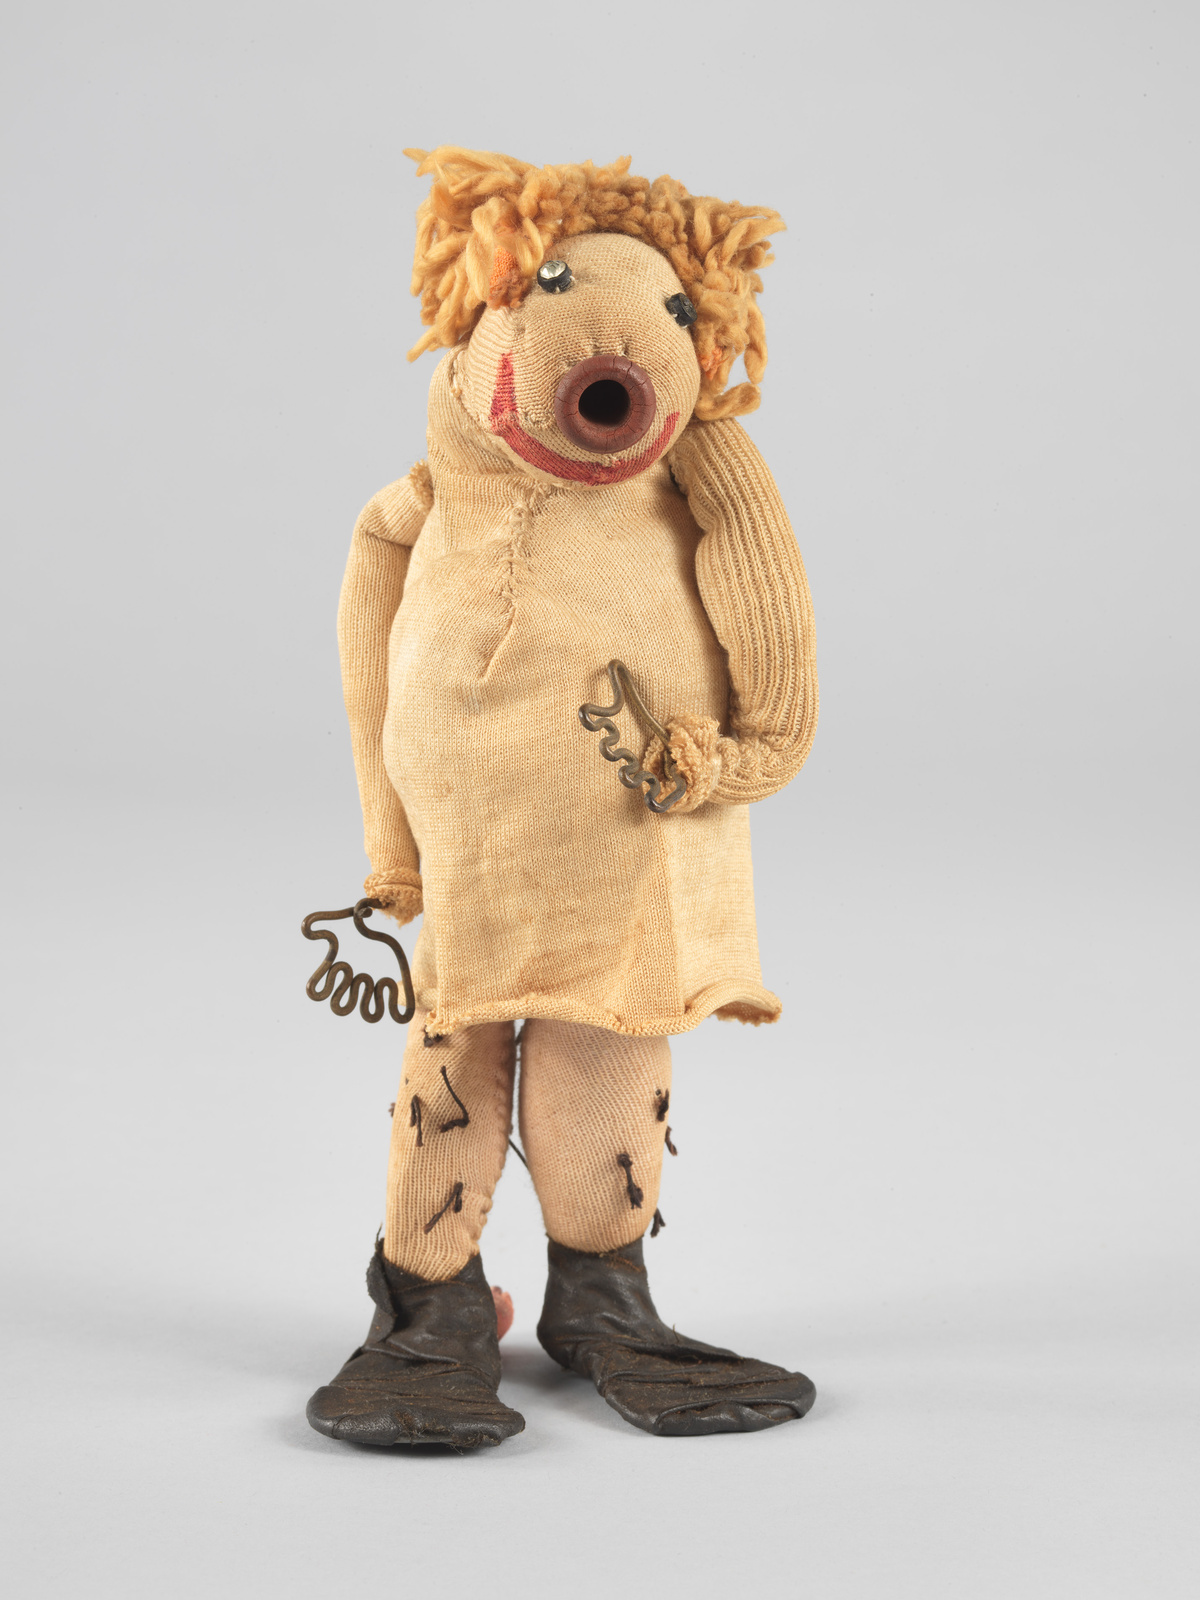 A rag doll-like sculpture, made of yellowed cloth with a round button-like nose, small rhinestone eyes, a curve for a smile, orange yarn hair, wire hands, and floppy shoes.